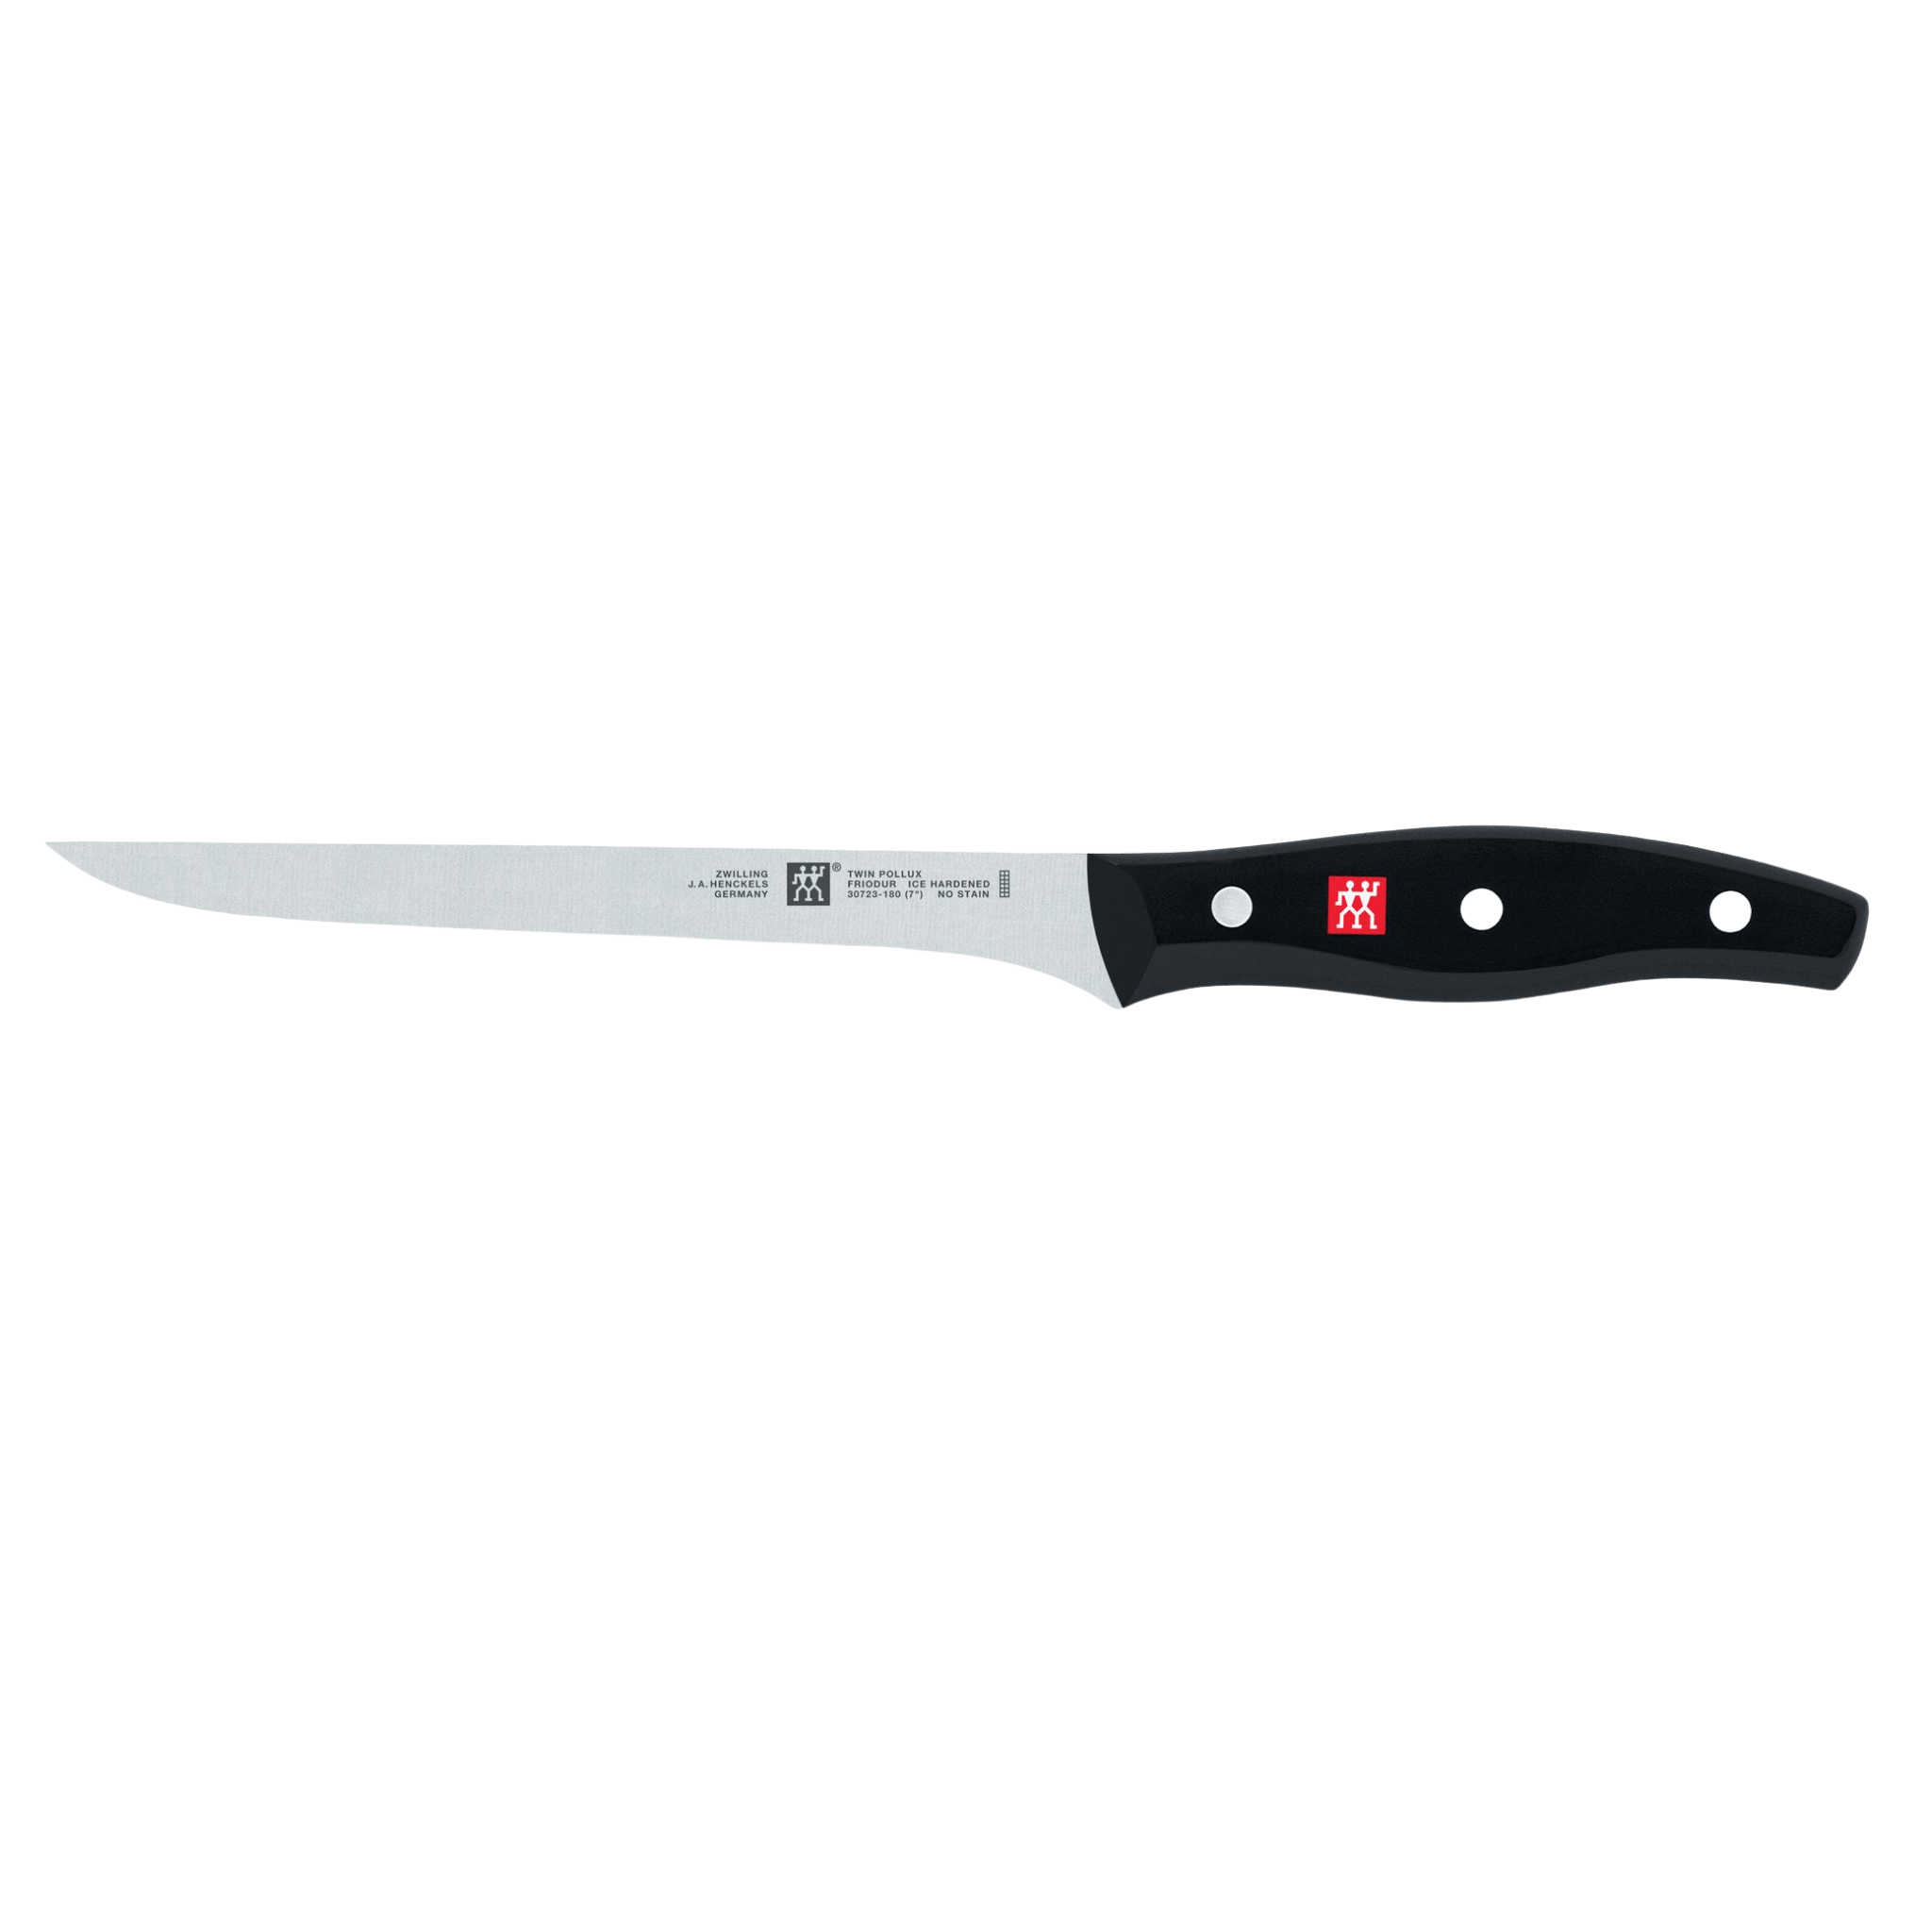 TWIN® Signature FILLETING KNIFE 7" / 180 mm - out of stock